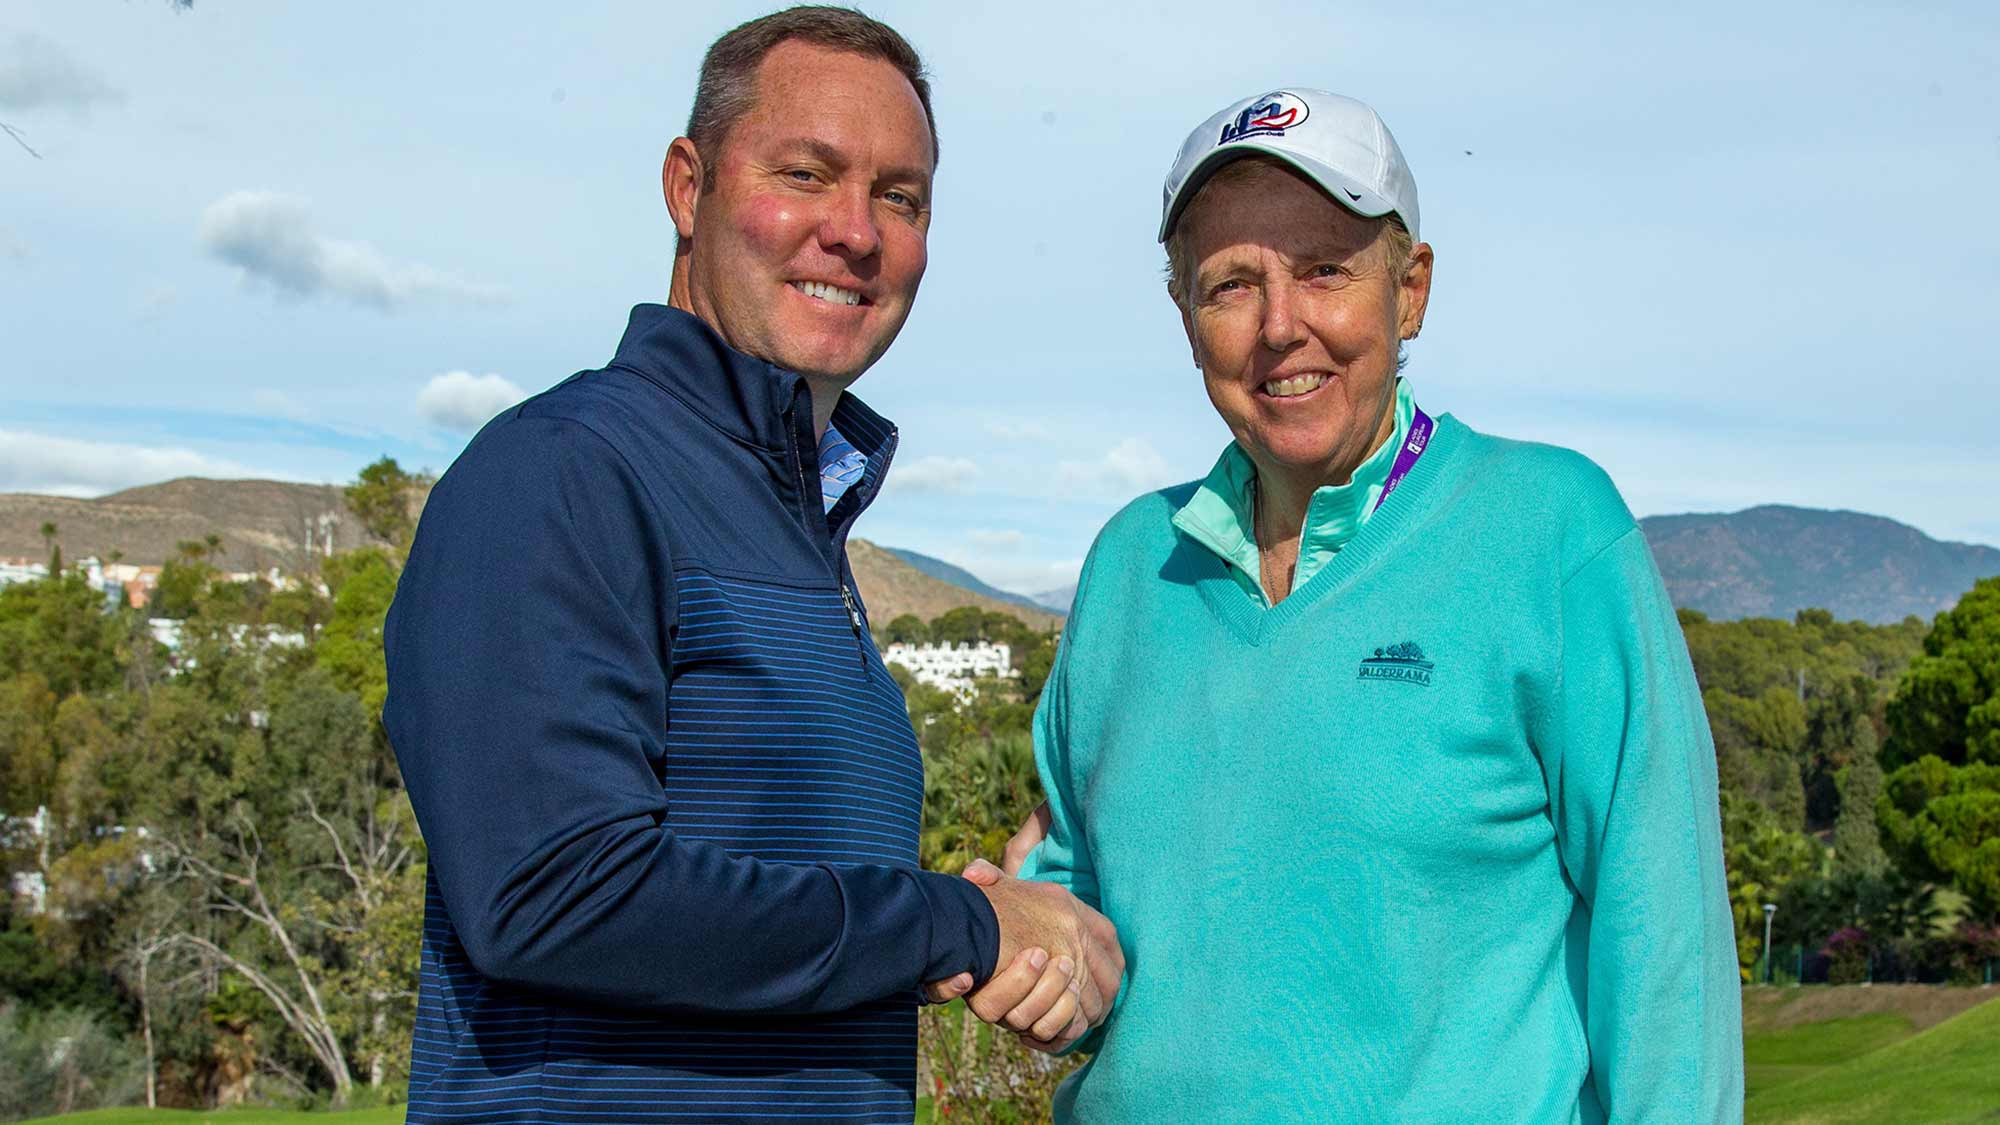 LPGA and LET join forces to drive growth of women's professional golf in Europe